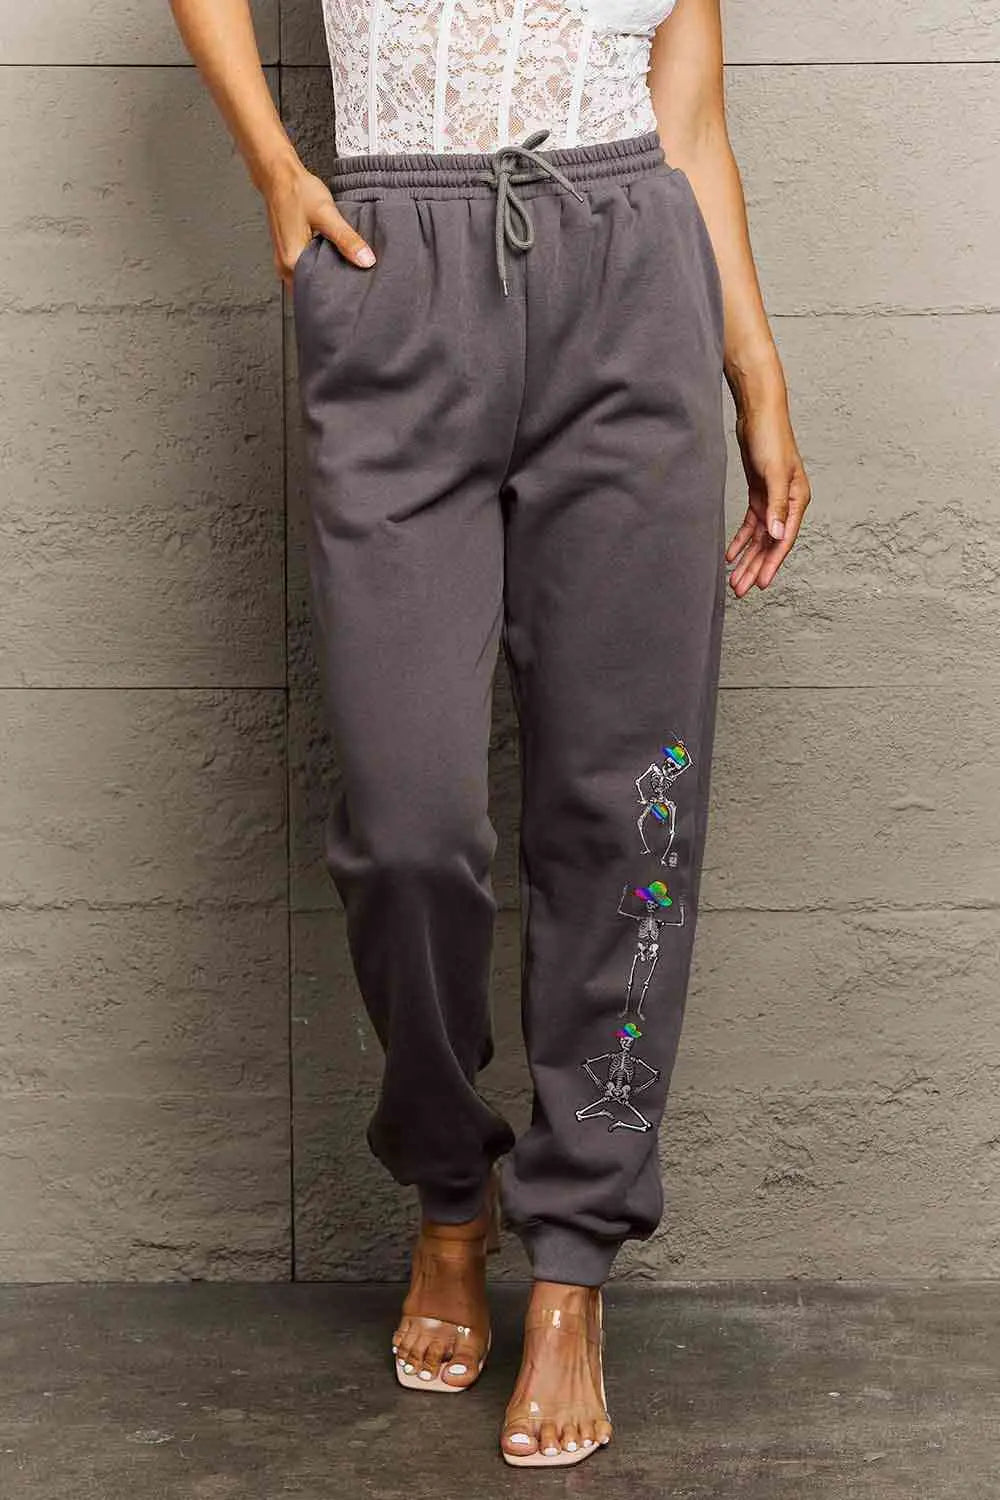 Simply Love Full Size SKELETON Graphic Sweatpants - Image #1